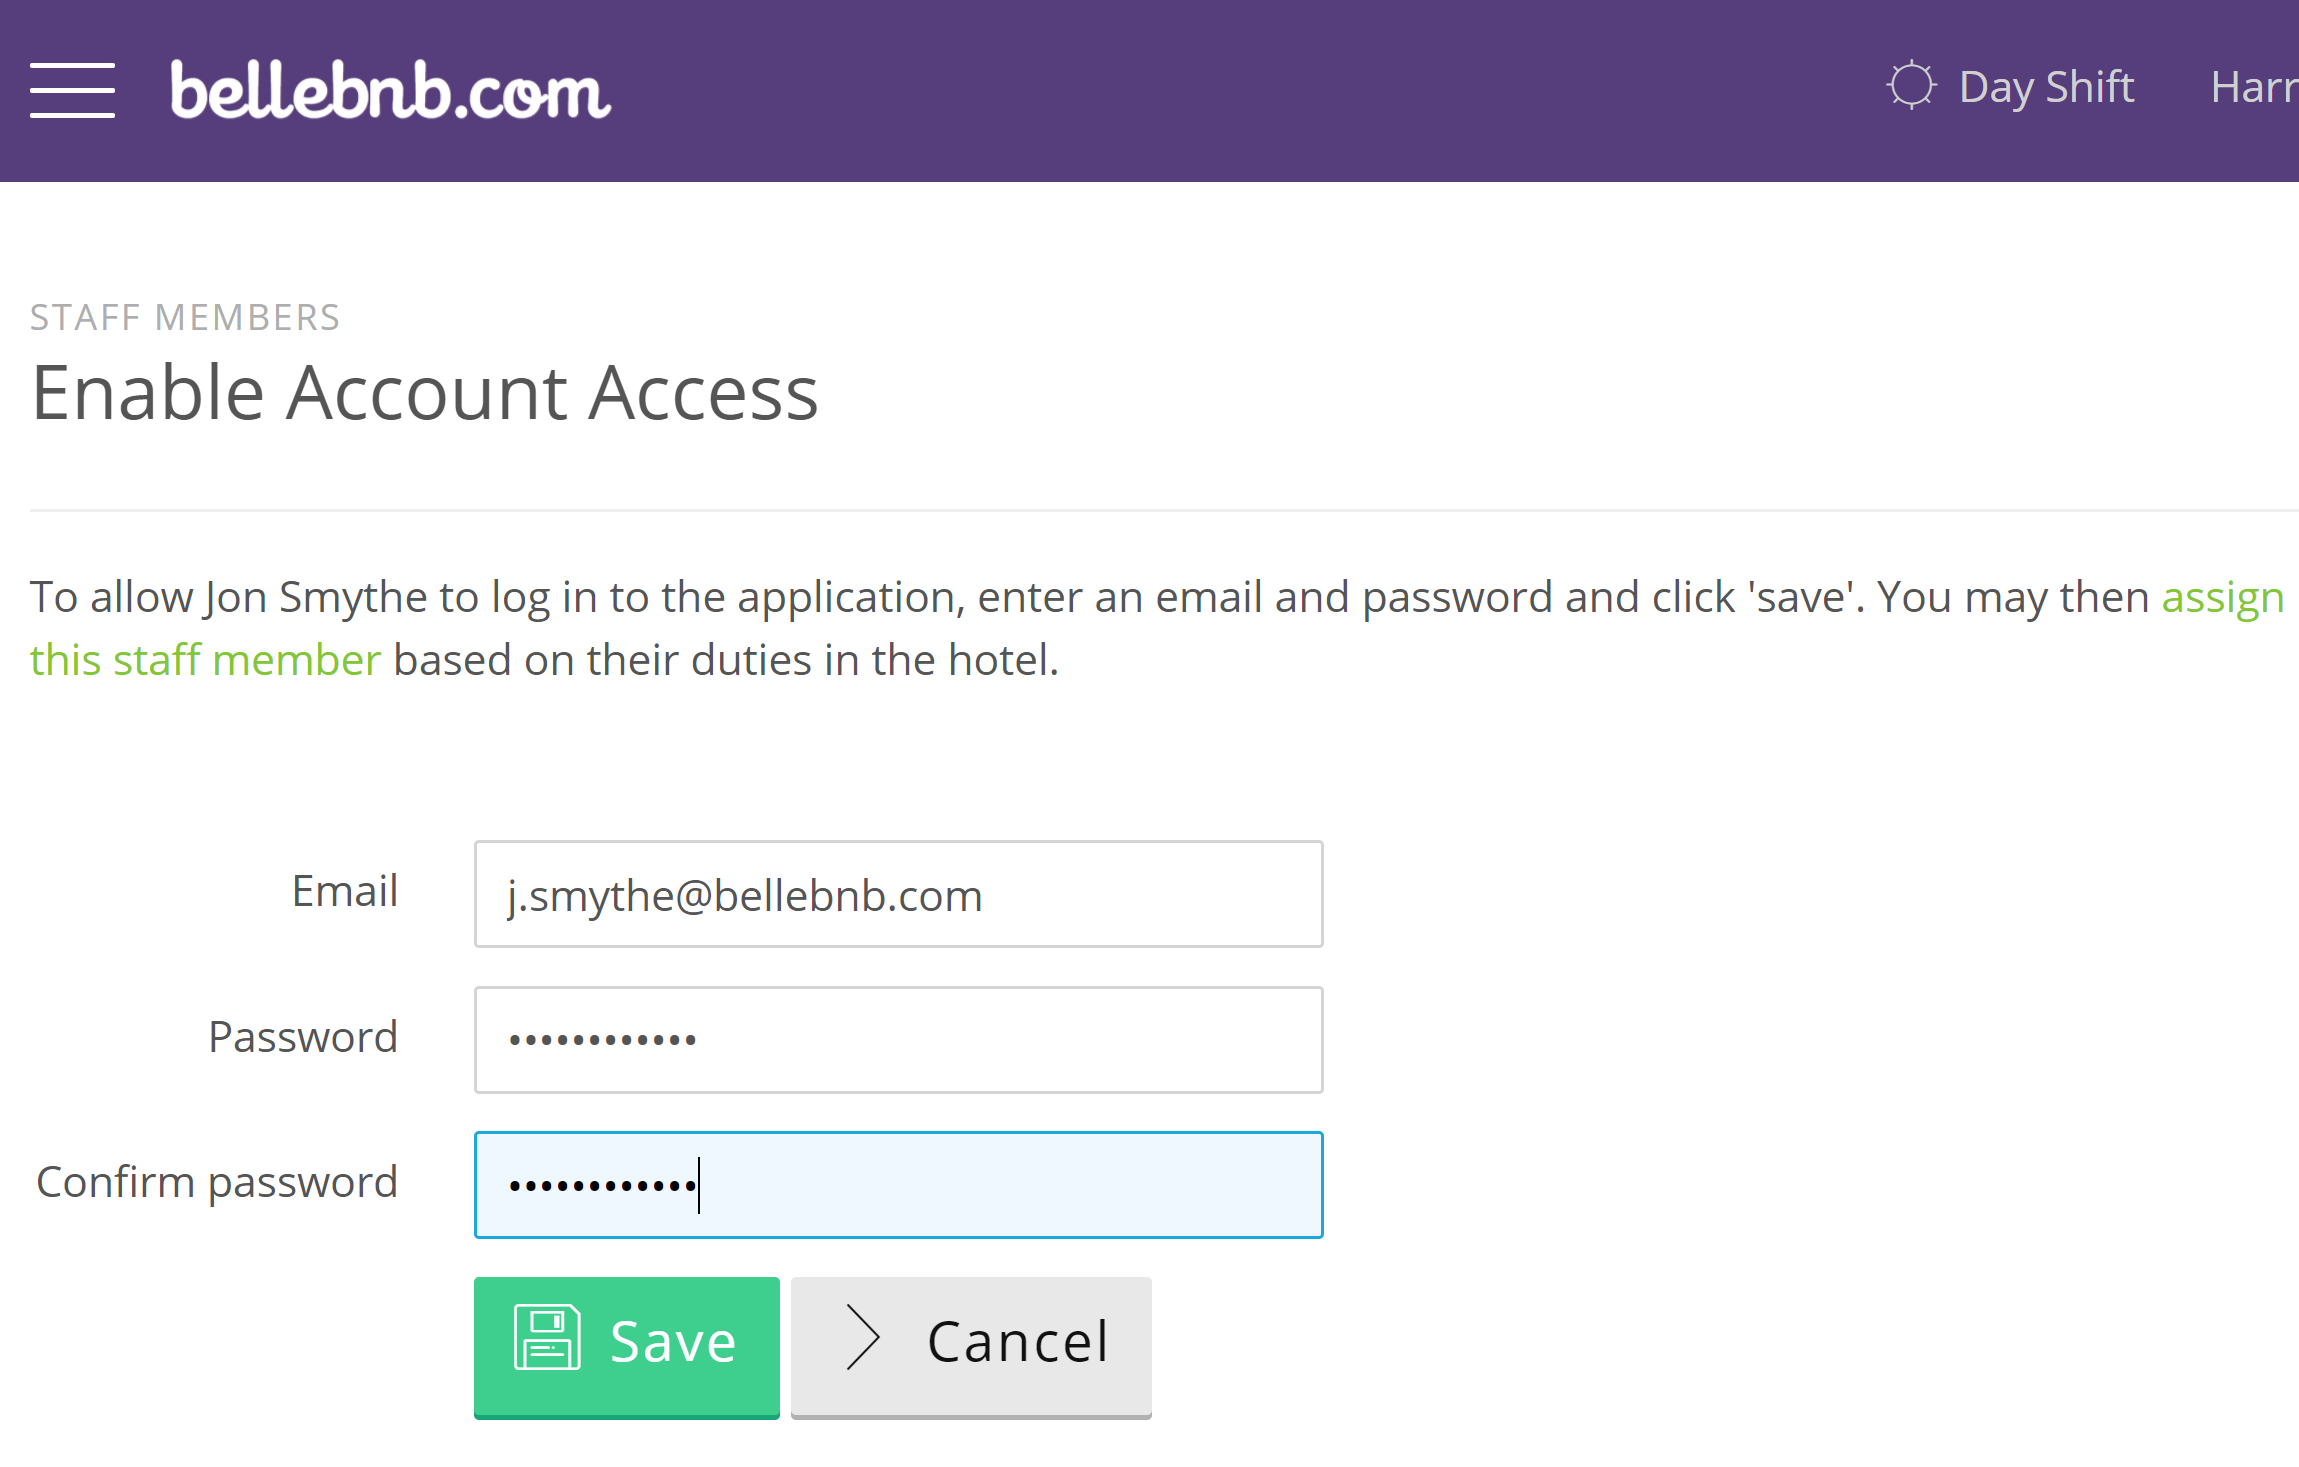 There are three basic types of account users: Account Owner, Property Managers, and Hotel Staff. There is one Account Owner per Bellebnb.com account. This is the user that opened the account. Account Owner status cannot be assigned, transferred, or shared. The account owner has full access to every part of the system for every hotel.